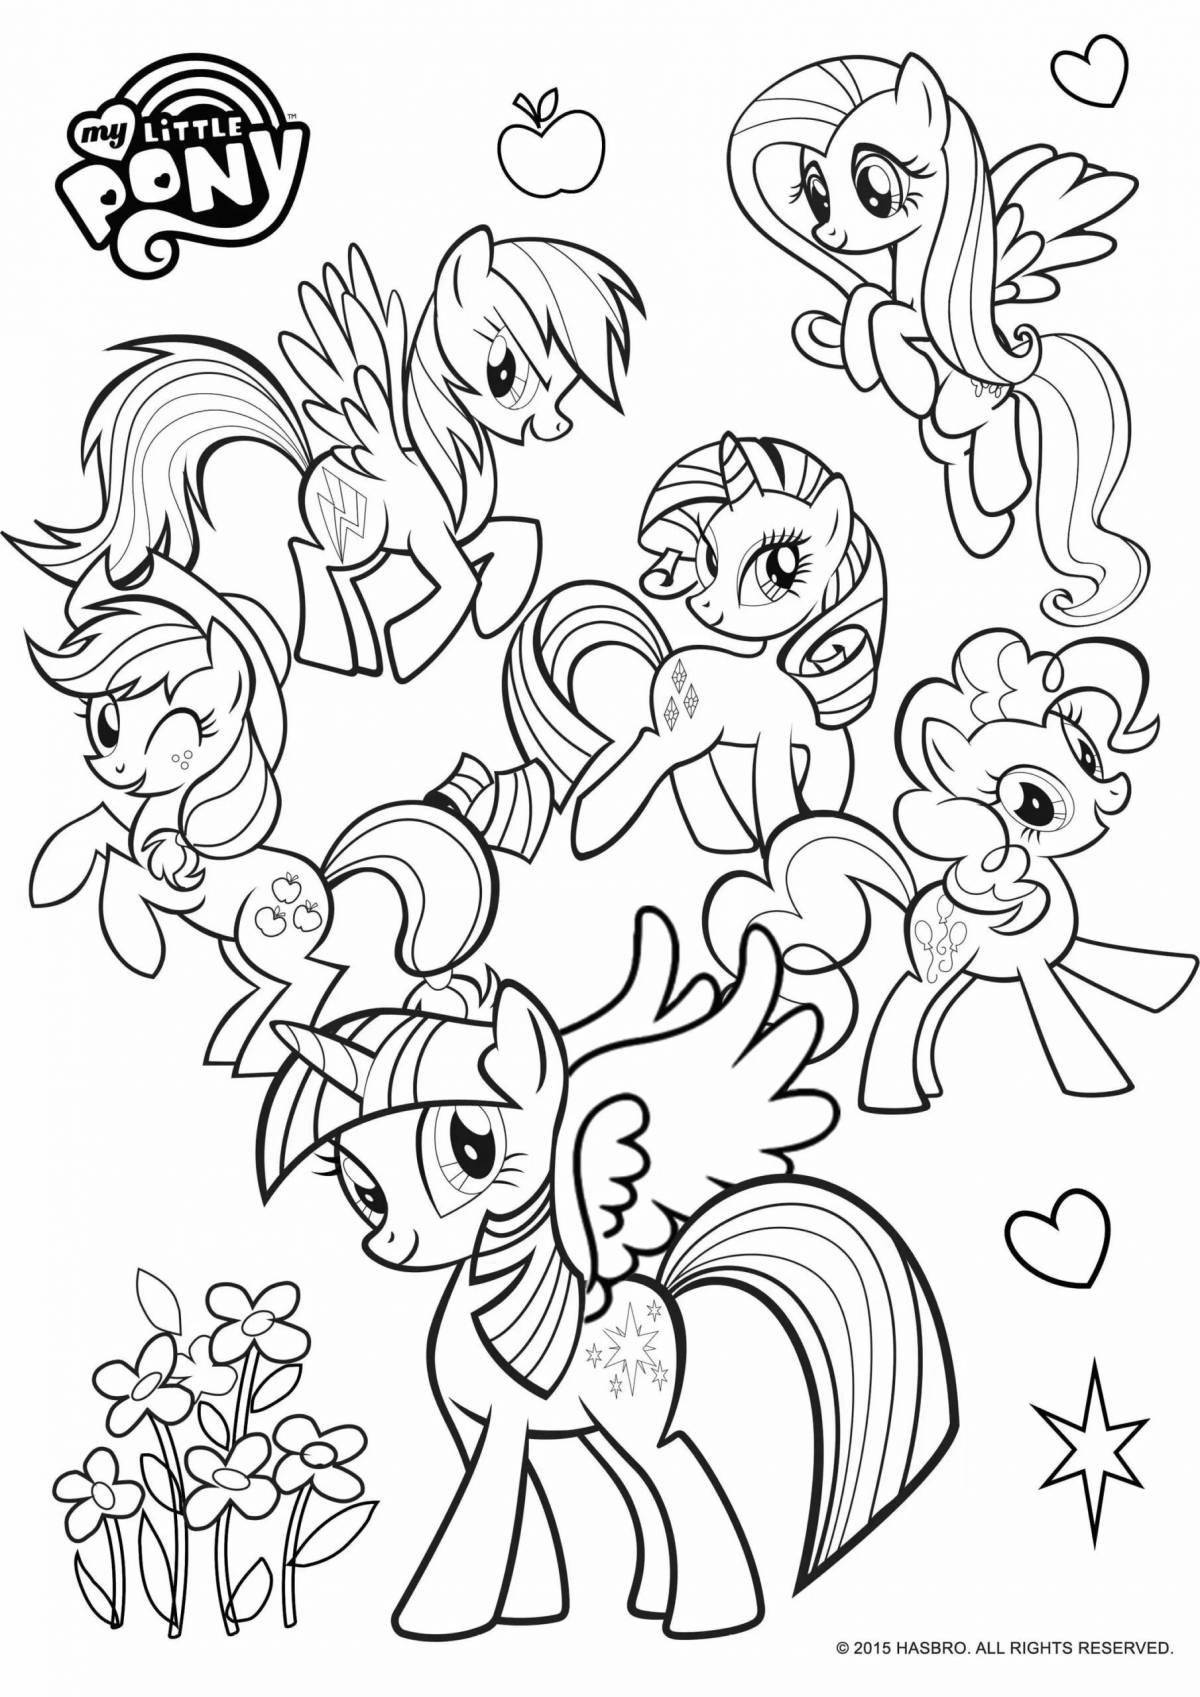 My little pony majestic coloring book